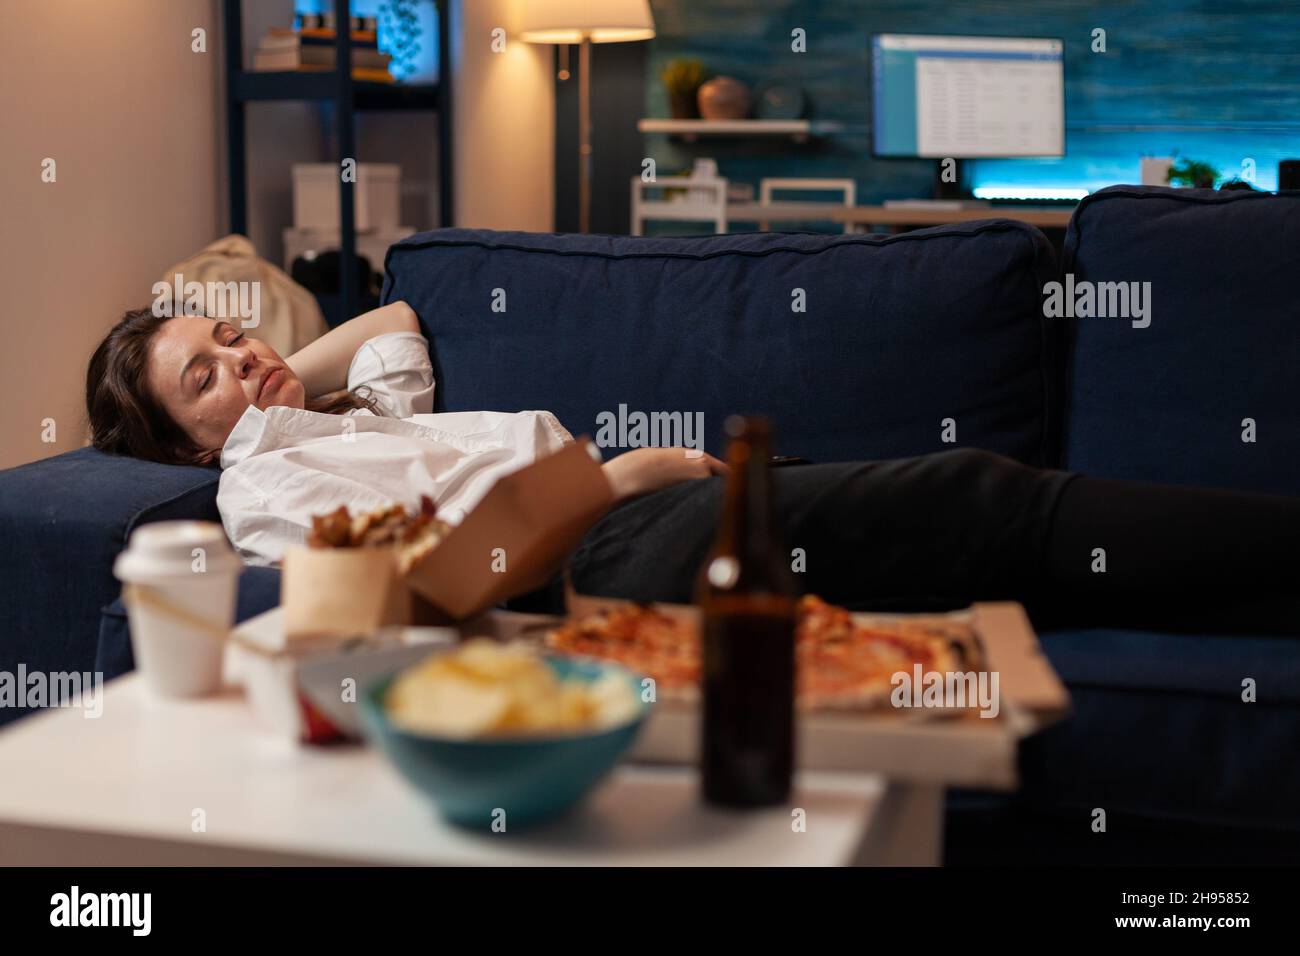 Person sleeping on sofa after drinking beer and eating home delivery pizza in front of television in living room. Tired woman falling asleep couch after large fast food takeout meal. Stock Photo